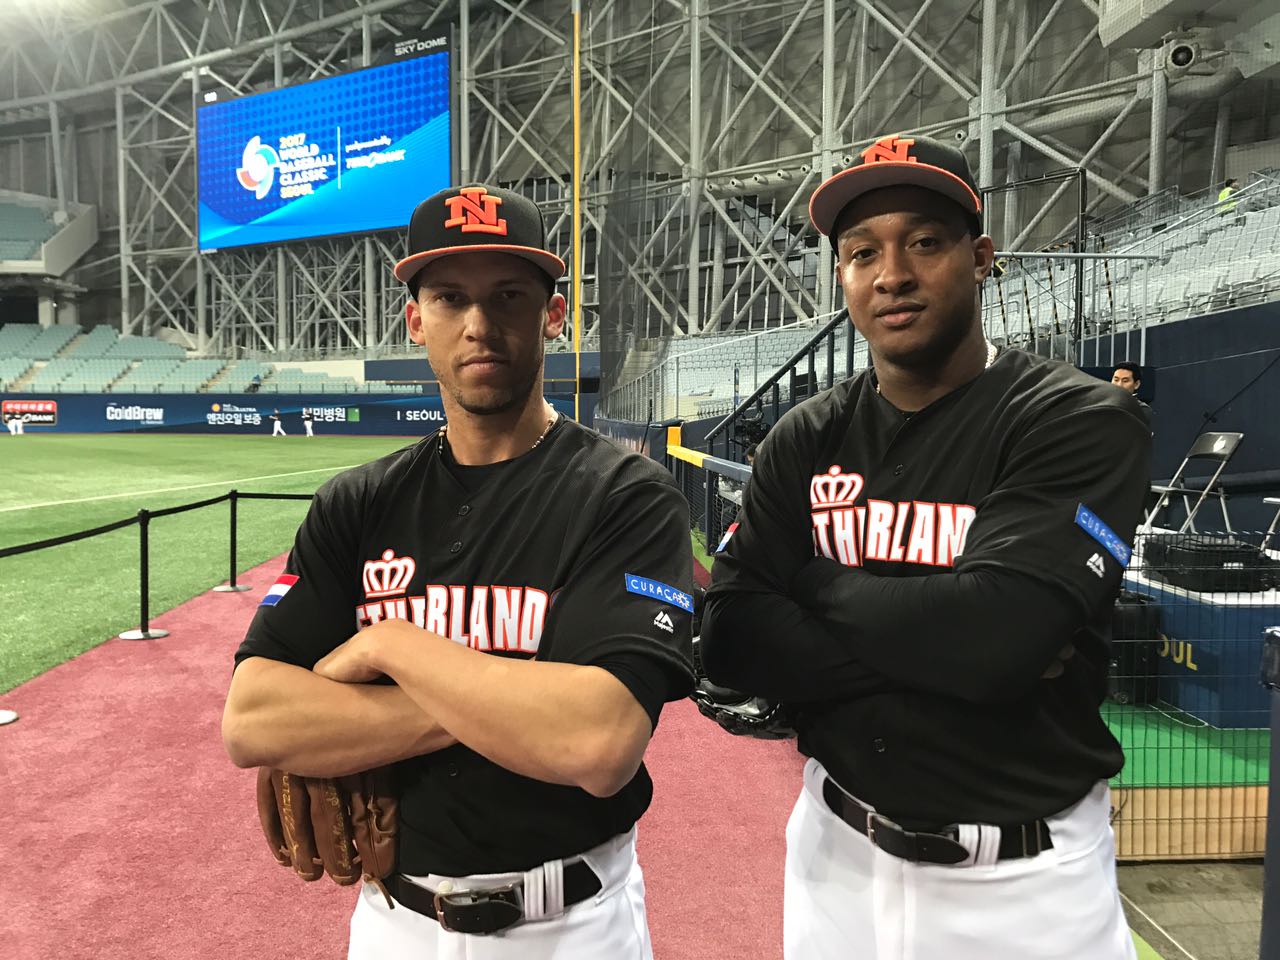 Curaçao Promoted on the Kingdom of the Netherlands' team shirts at the World  Baseball Classic - Curaçao Tourist Board